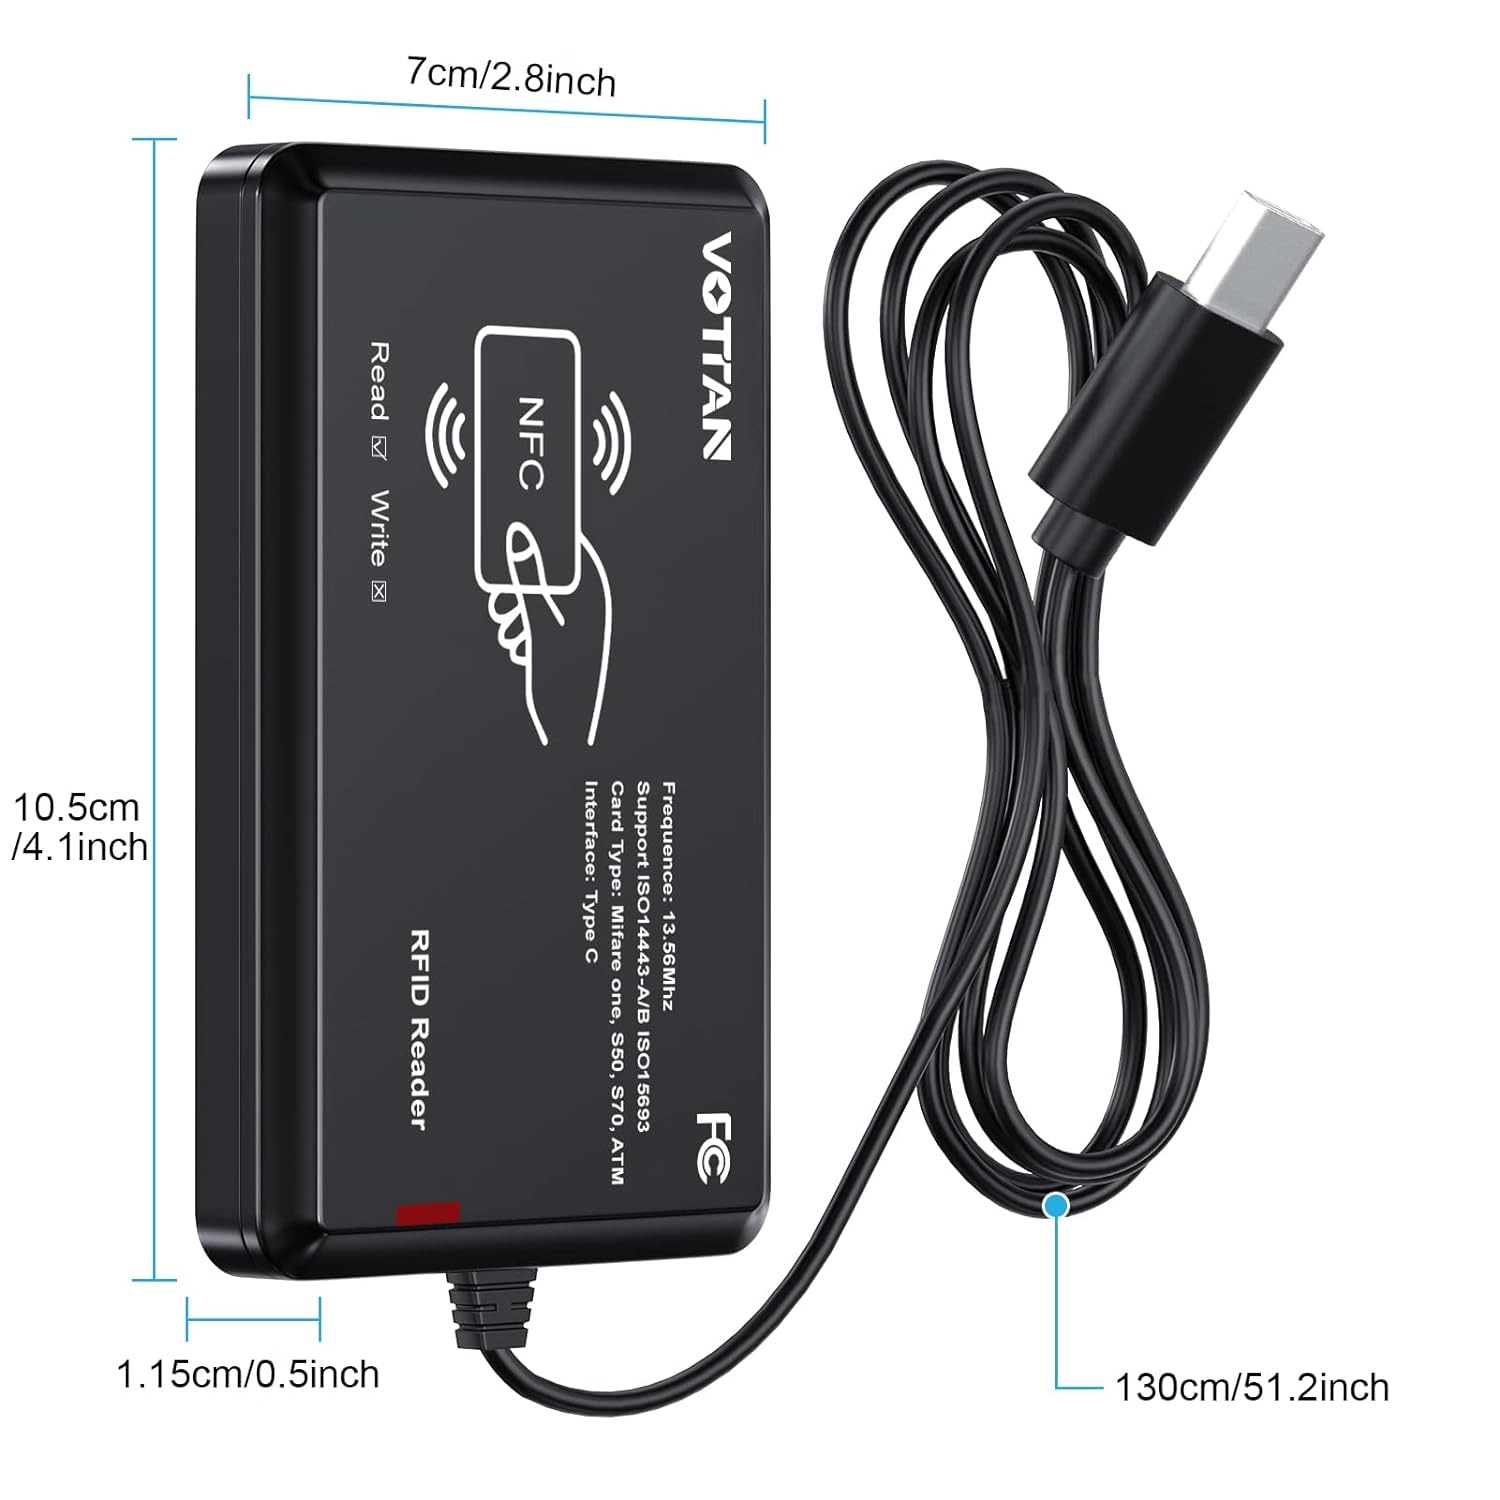 RFID Card Reader 13.56mhz Reader, Support ISO14443-A/B Protocol, ID Card and 14443B Protocol Labels Contactless Card Reader Compatible with Windows/Linux/Android/Mac OS